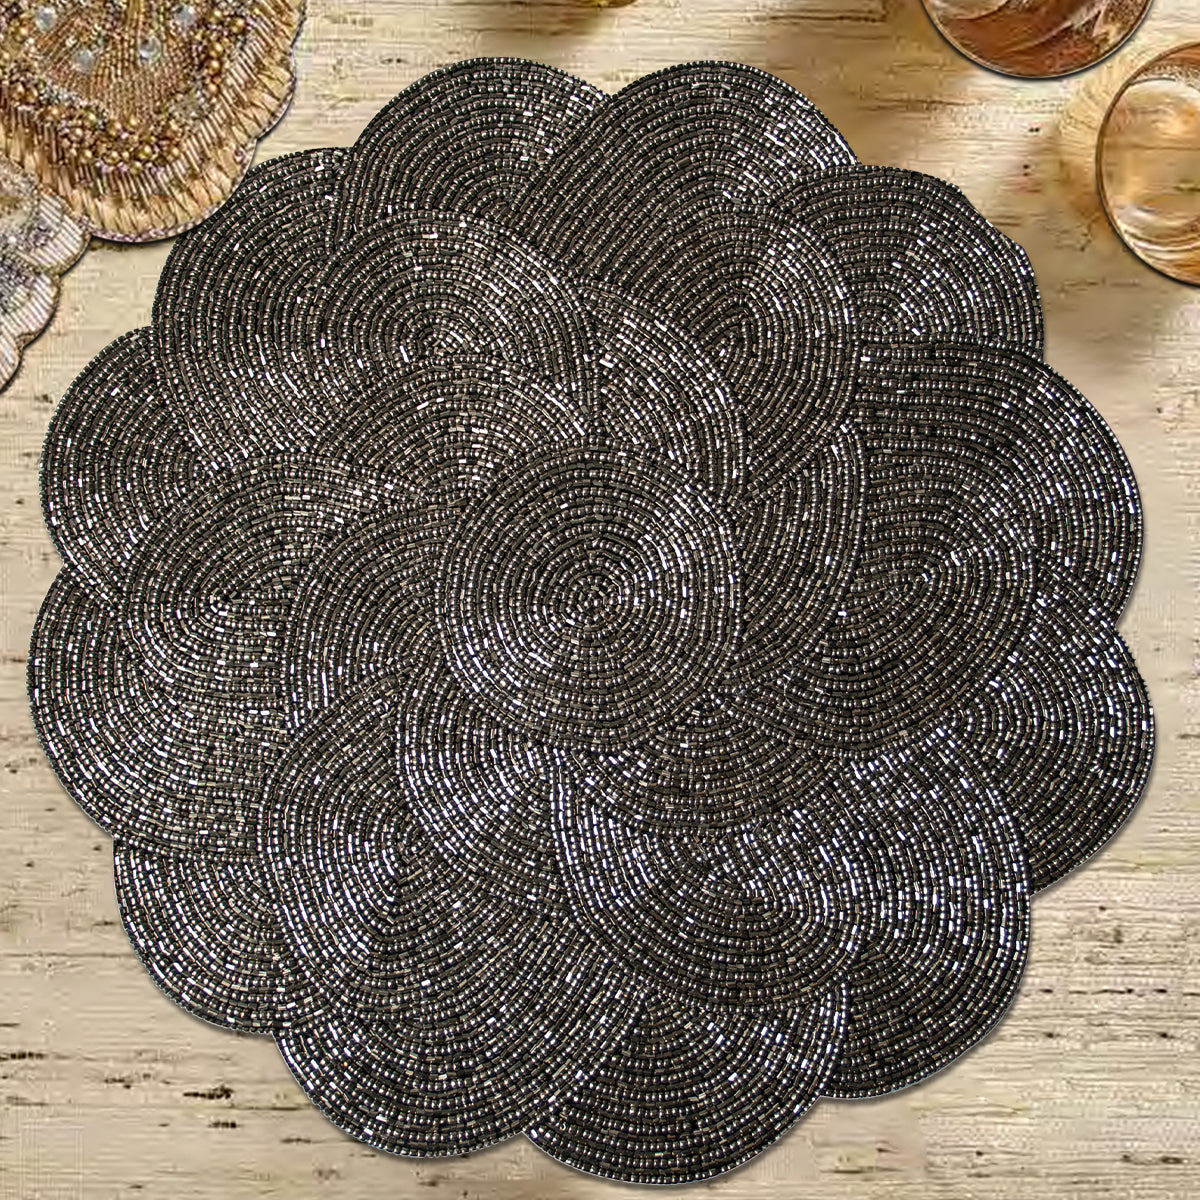 The Jovie Beaded Placemats